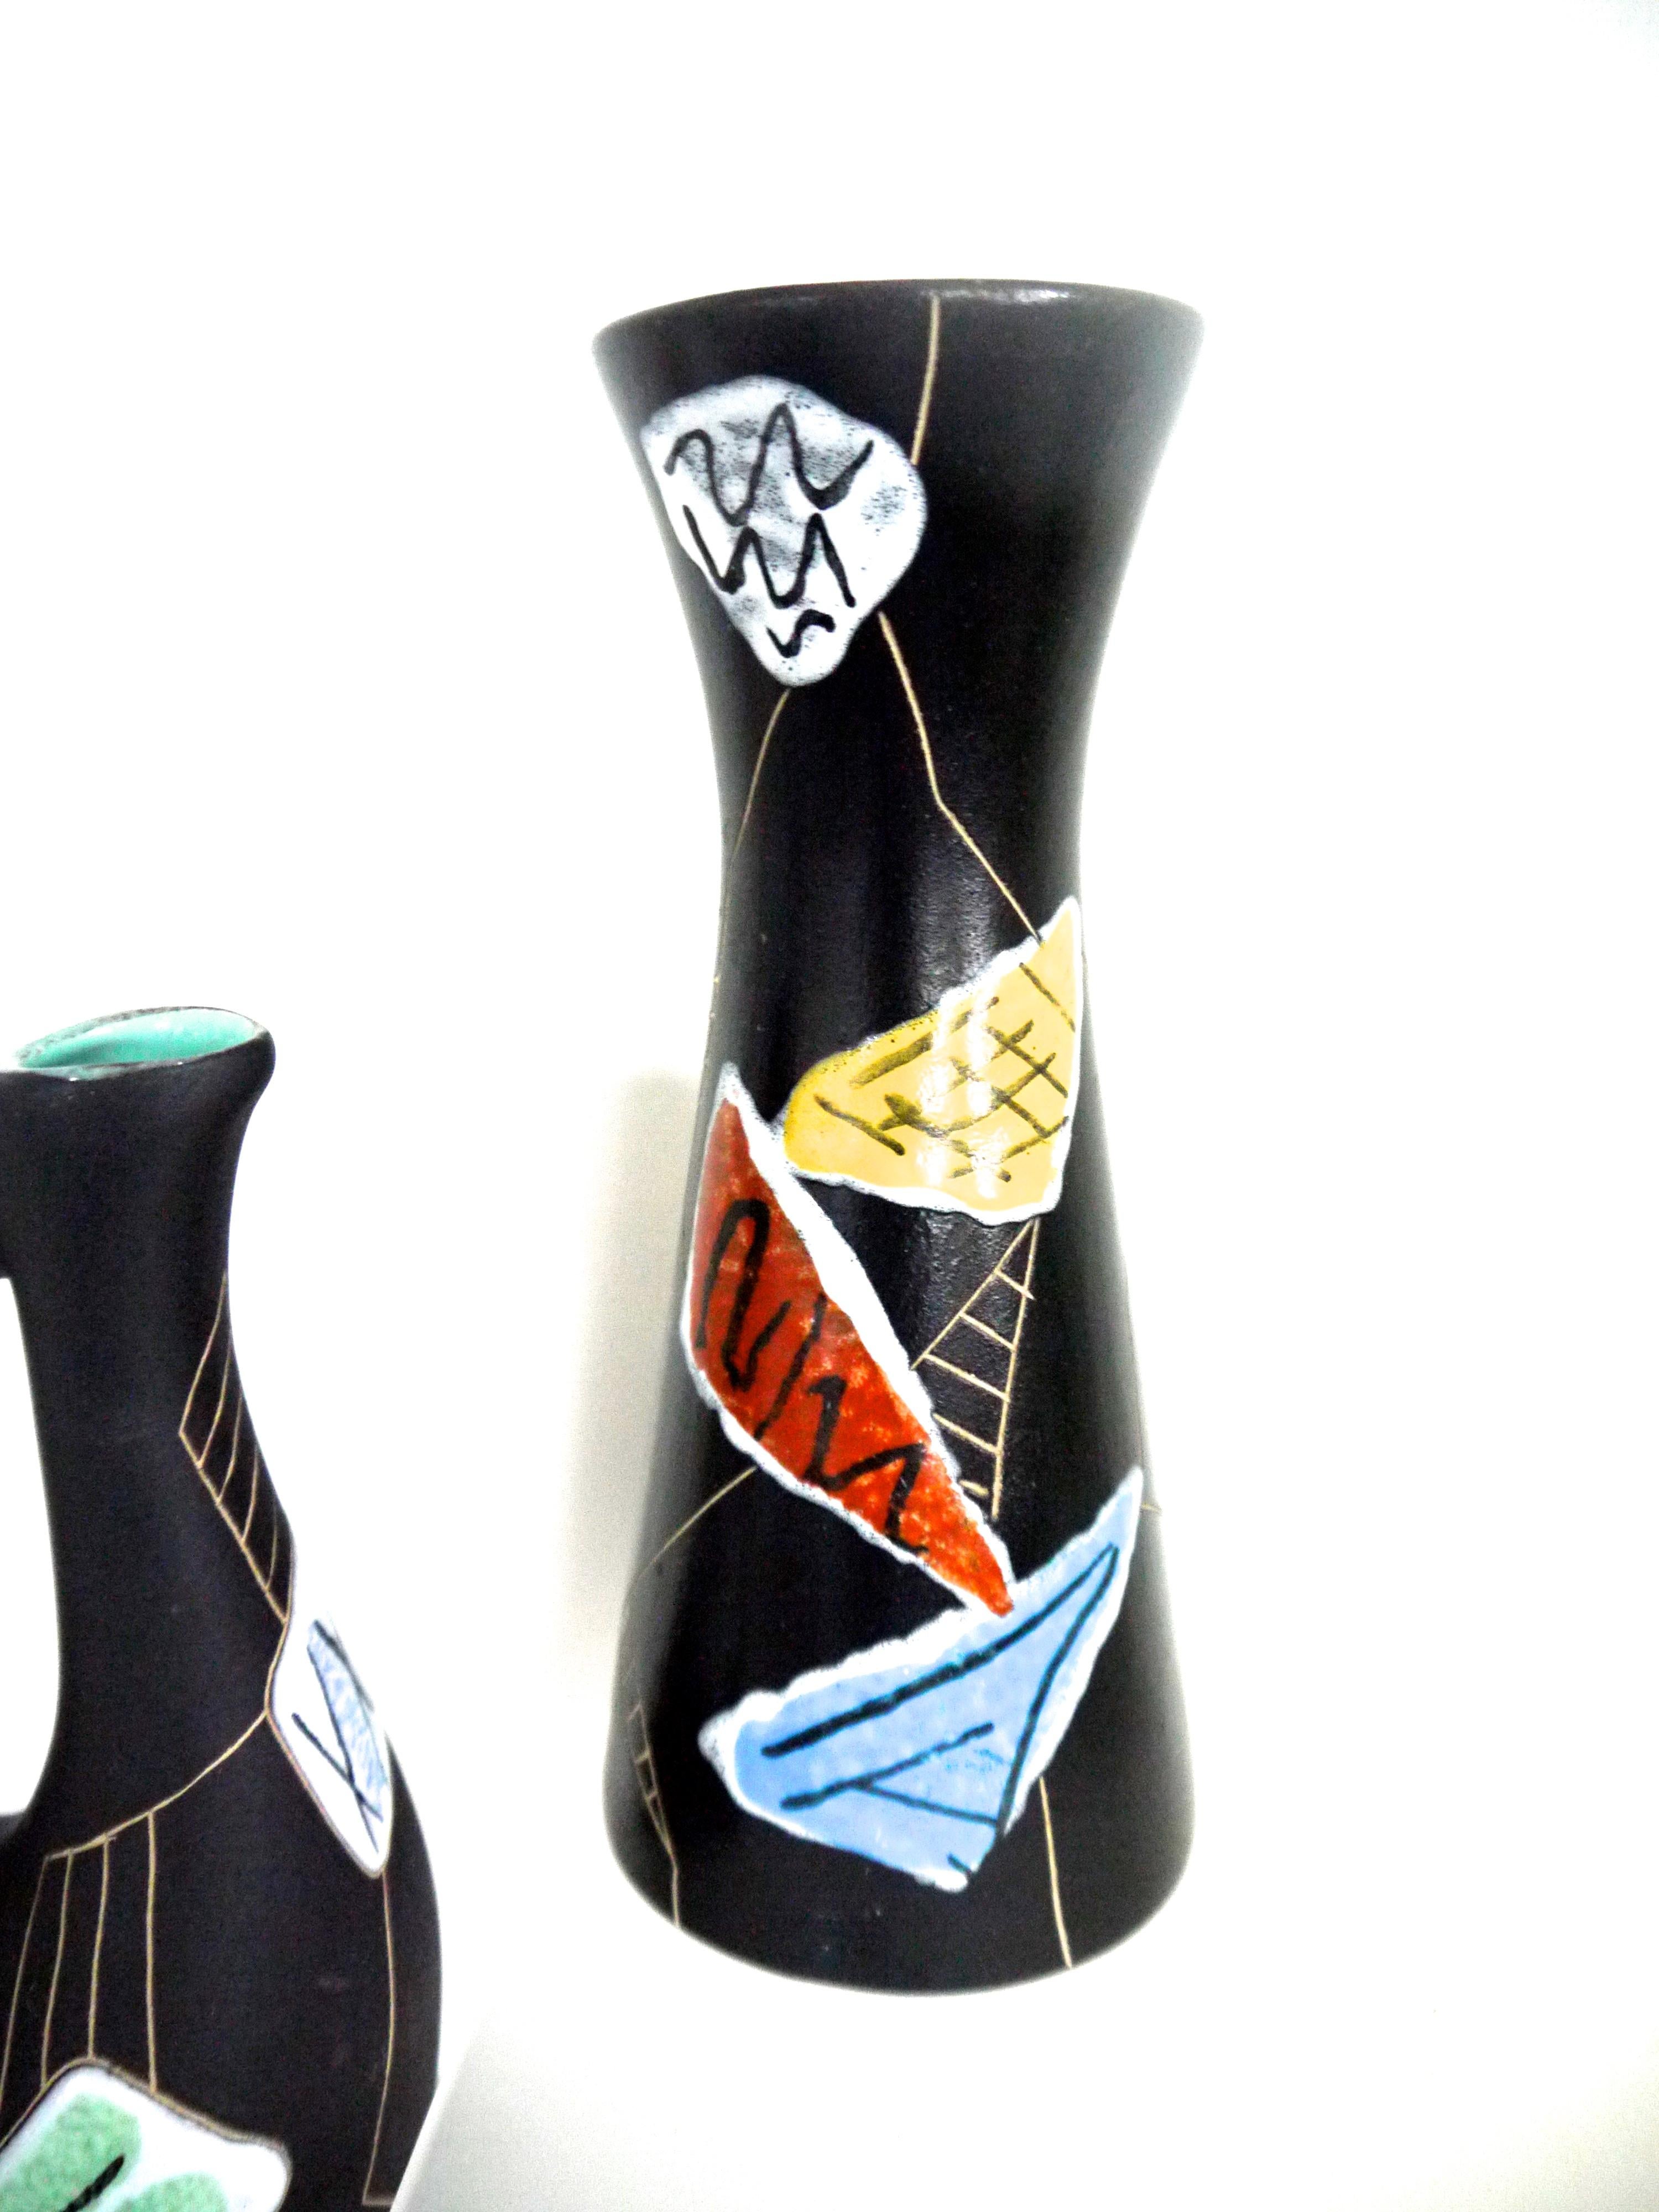 German Modernist Hand Painted Ceramic Pitcher 'small' 'Morroco' Design, 1950s For Sale 1